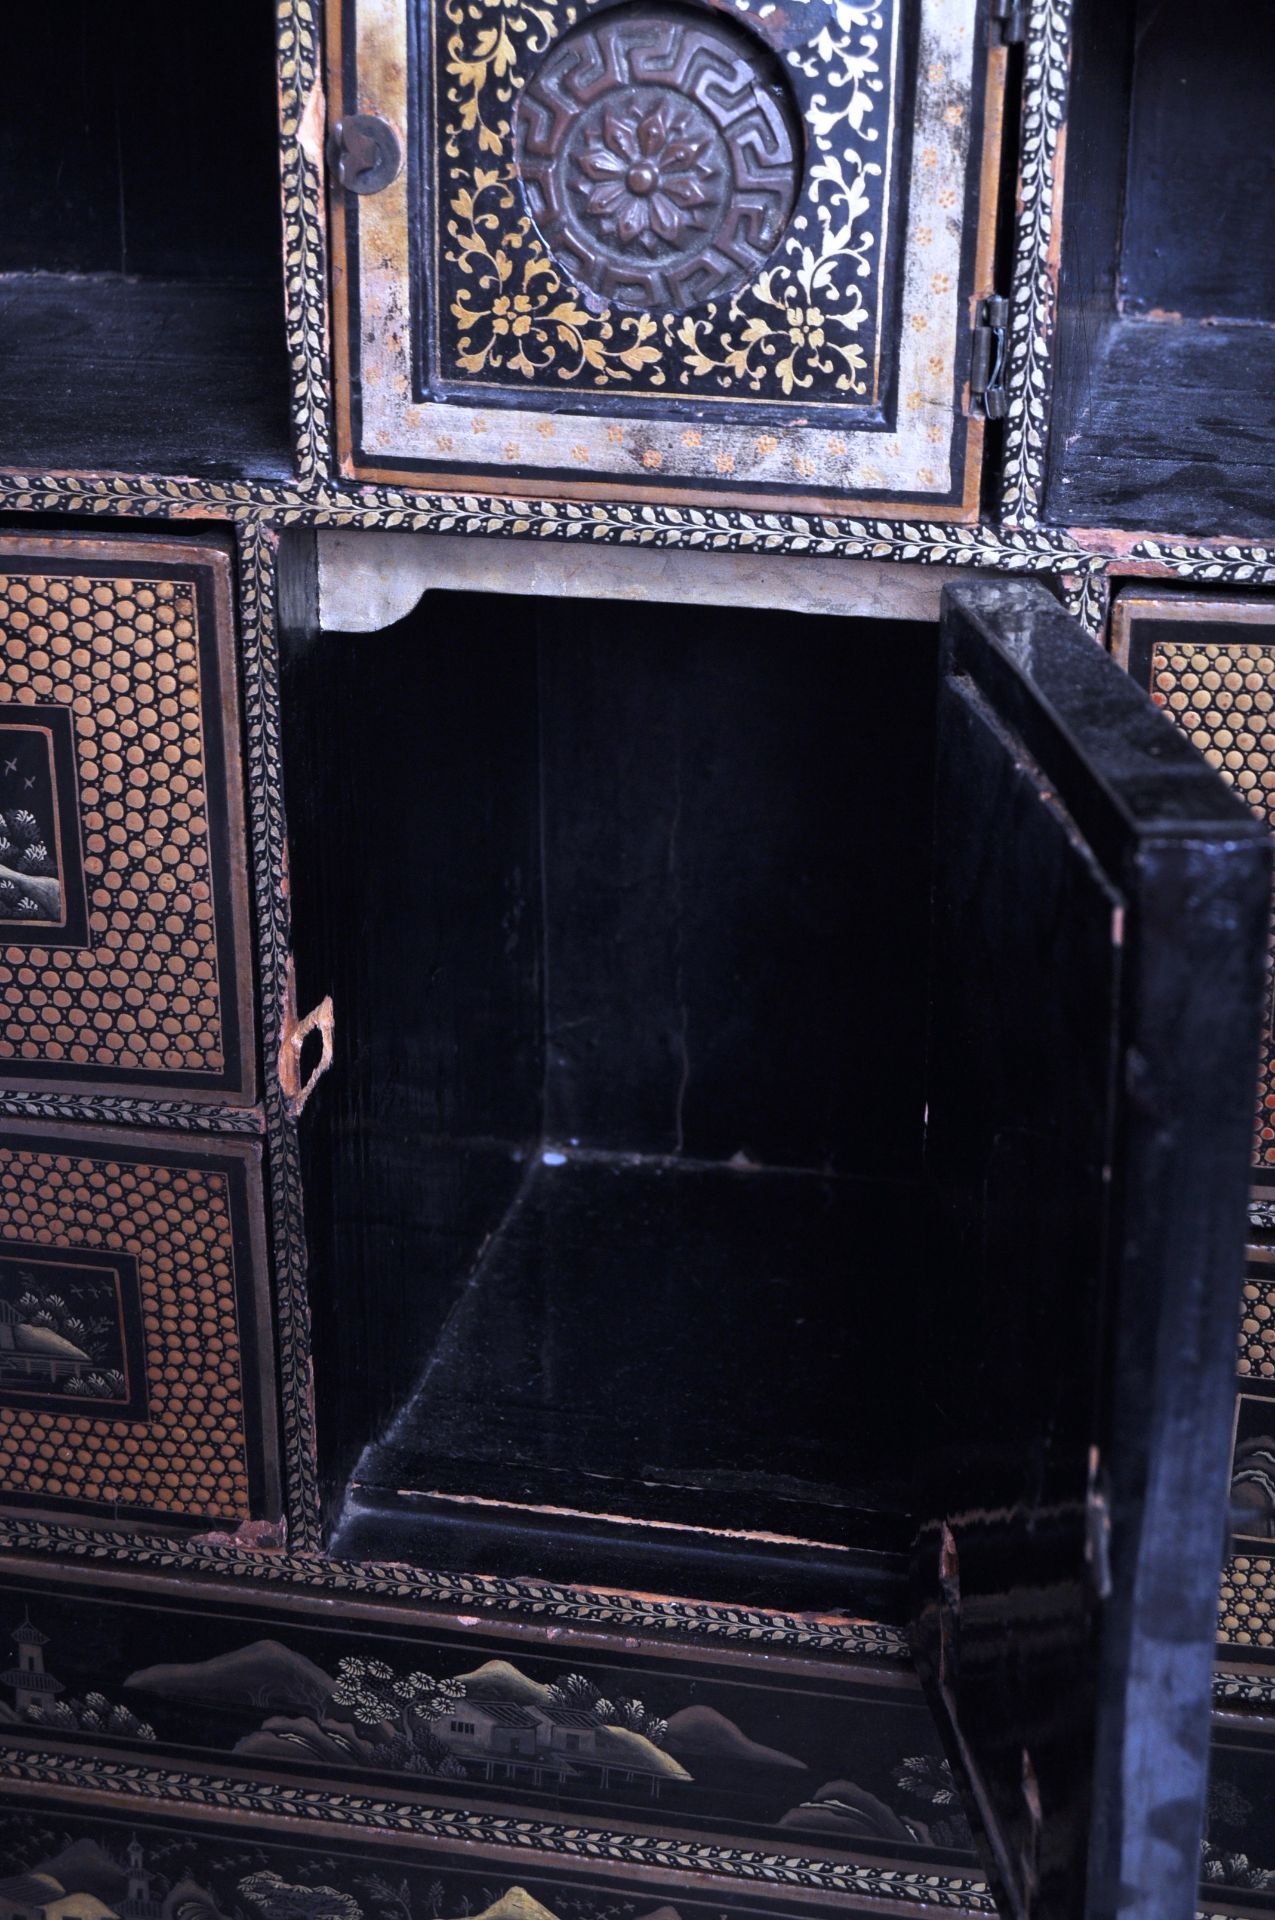 ANTIQUE 19TH CENTURY CHINESE BLACK LACQUER CHINOISERIE CABINET - Image 7 of 22